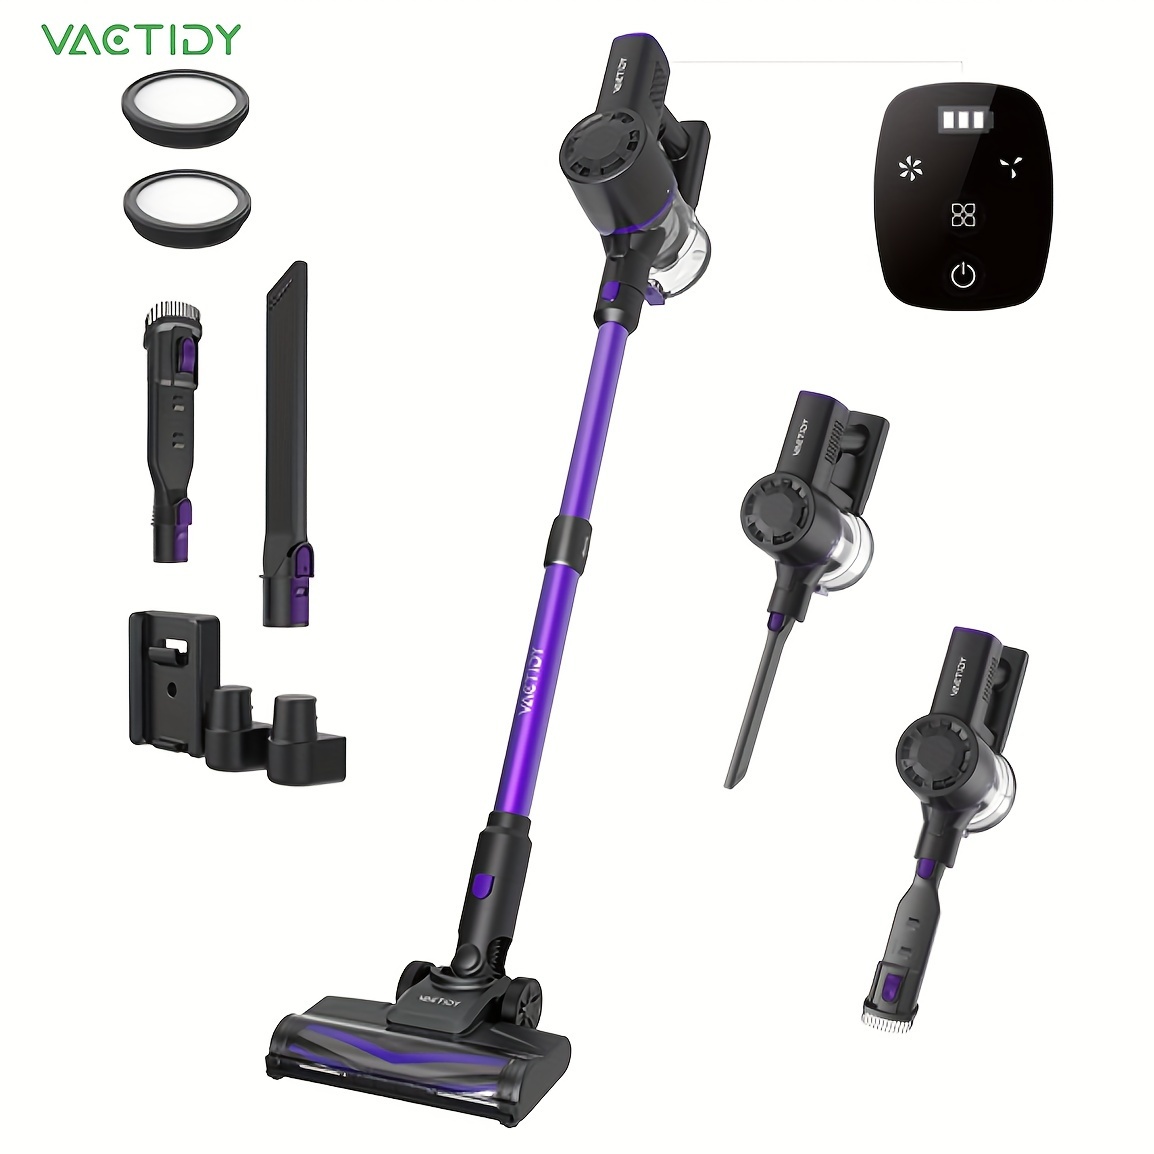 

Vactidy V8 Pro Cordless Vacuum Cleaner With Upgraded Floor Brush, Powerful Stick Vacuum With Touch Display, Self-standing Design, Lightweight Vacuum